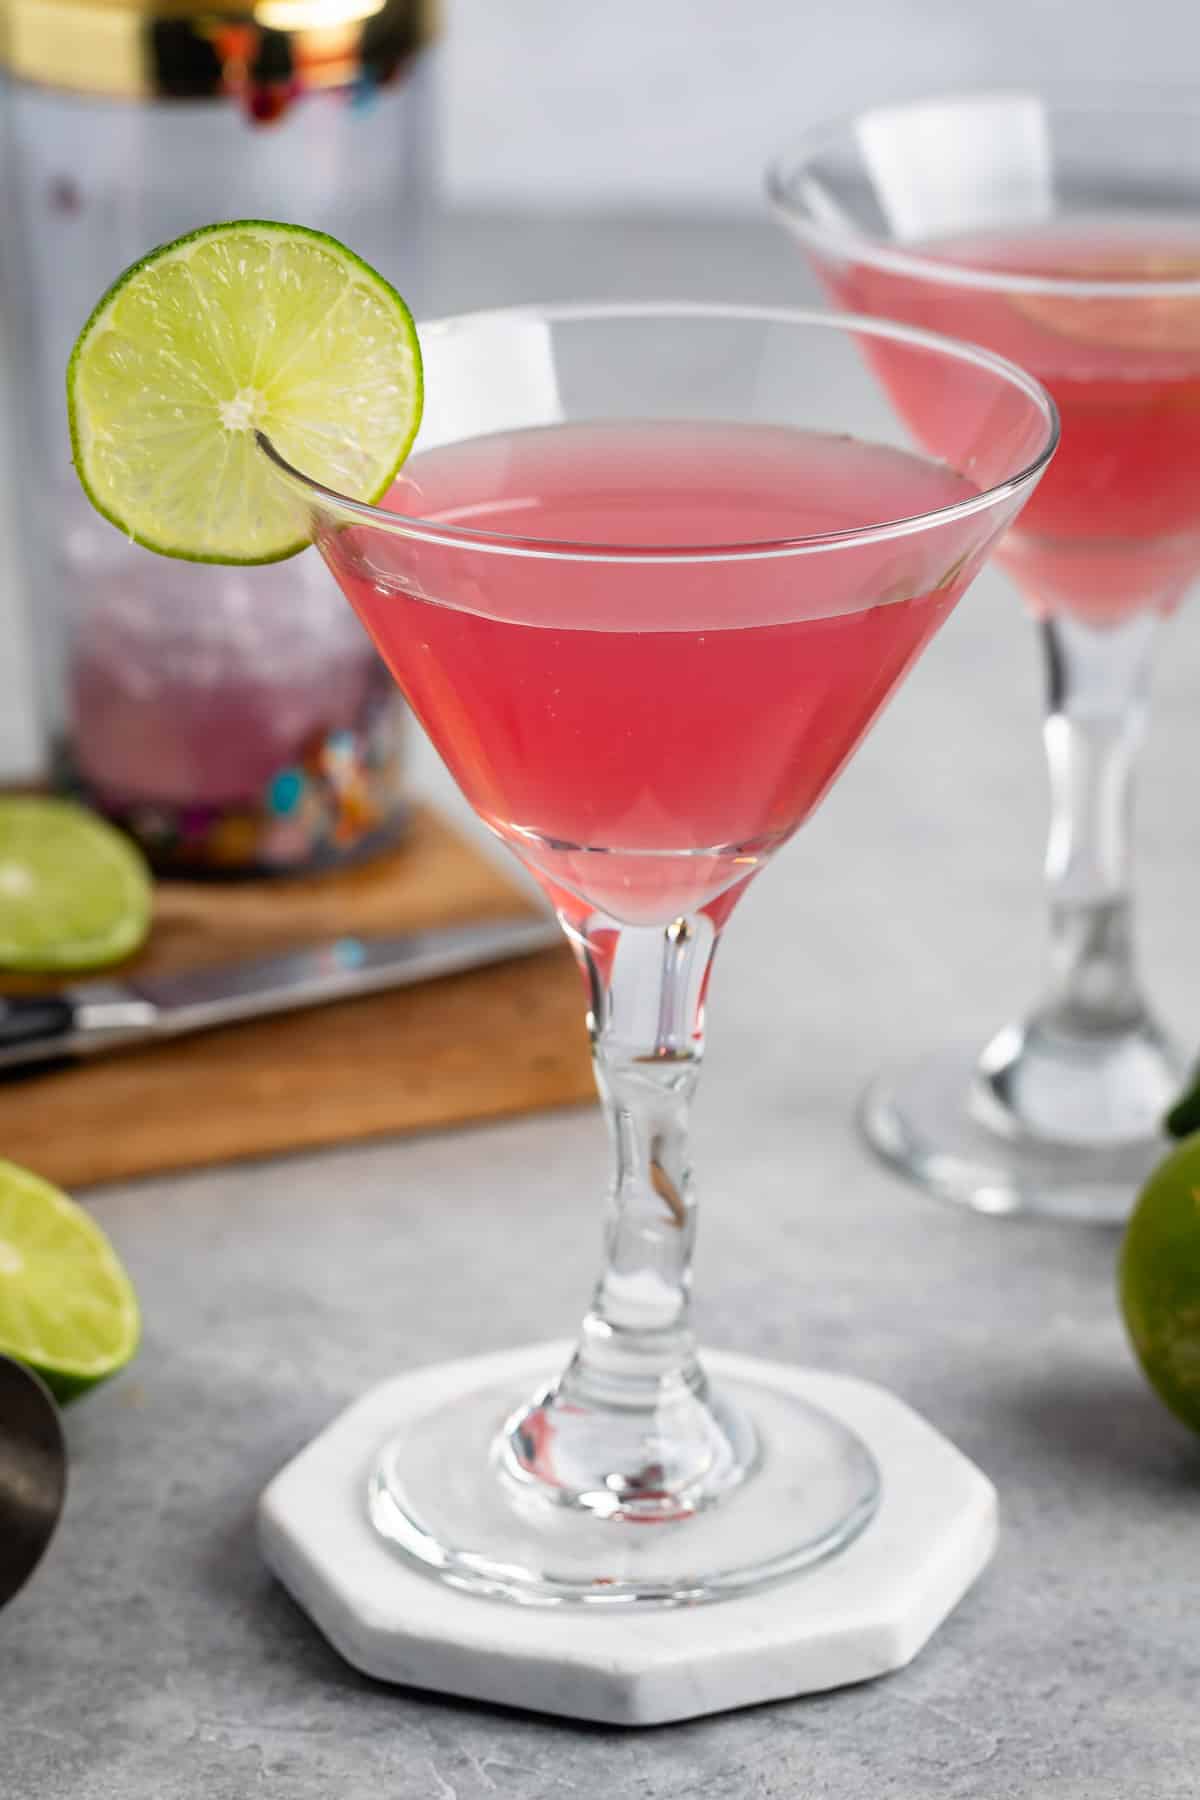 pink drink in a clear glass with a sliced lime on the edge.